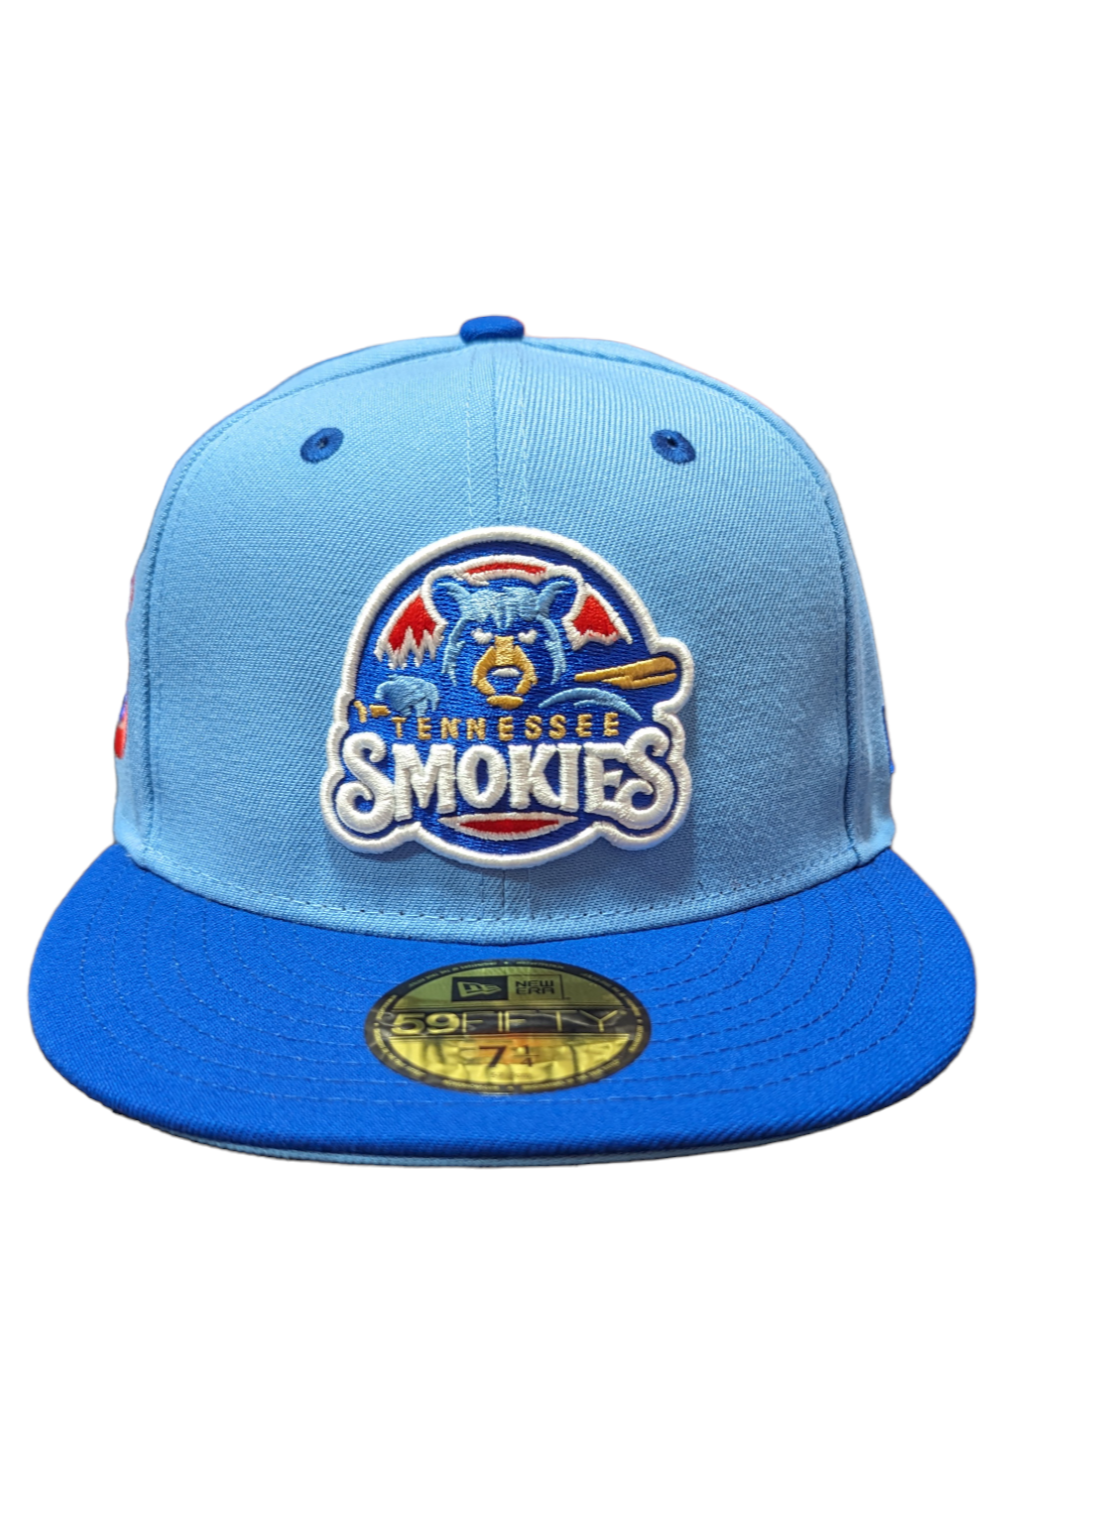 Tennessee Smokies MILB 2 Tone Sky Blue/Royal New Era 59FIFTY Fitted Hat